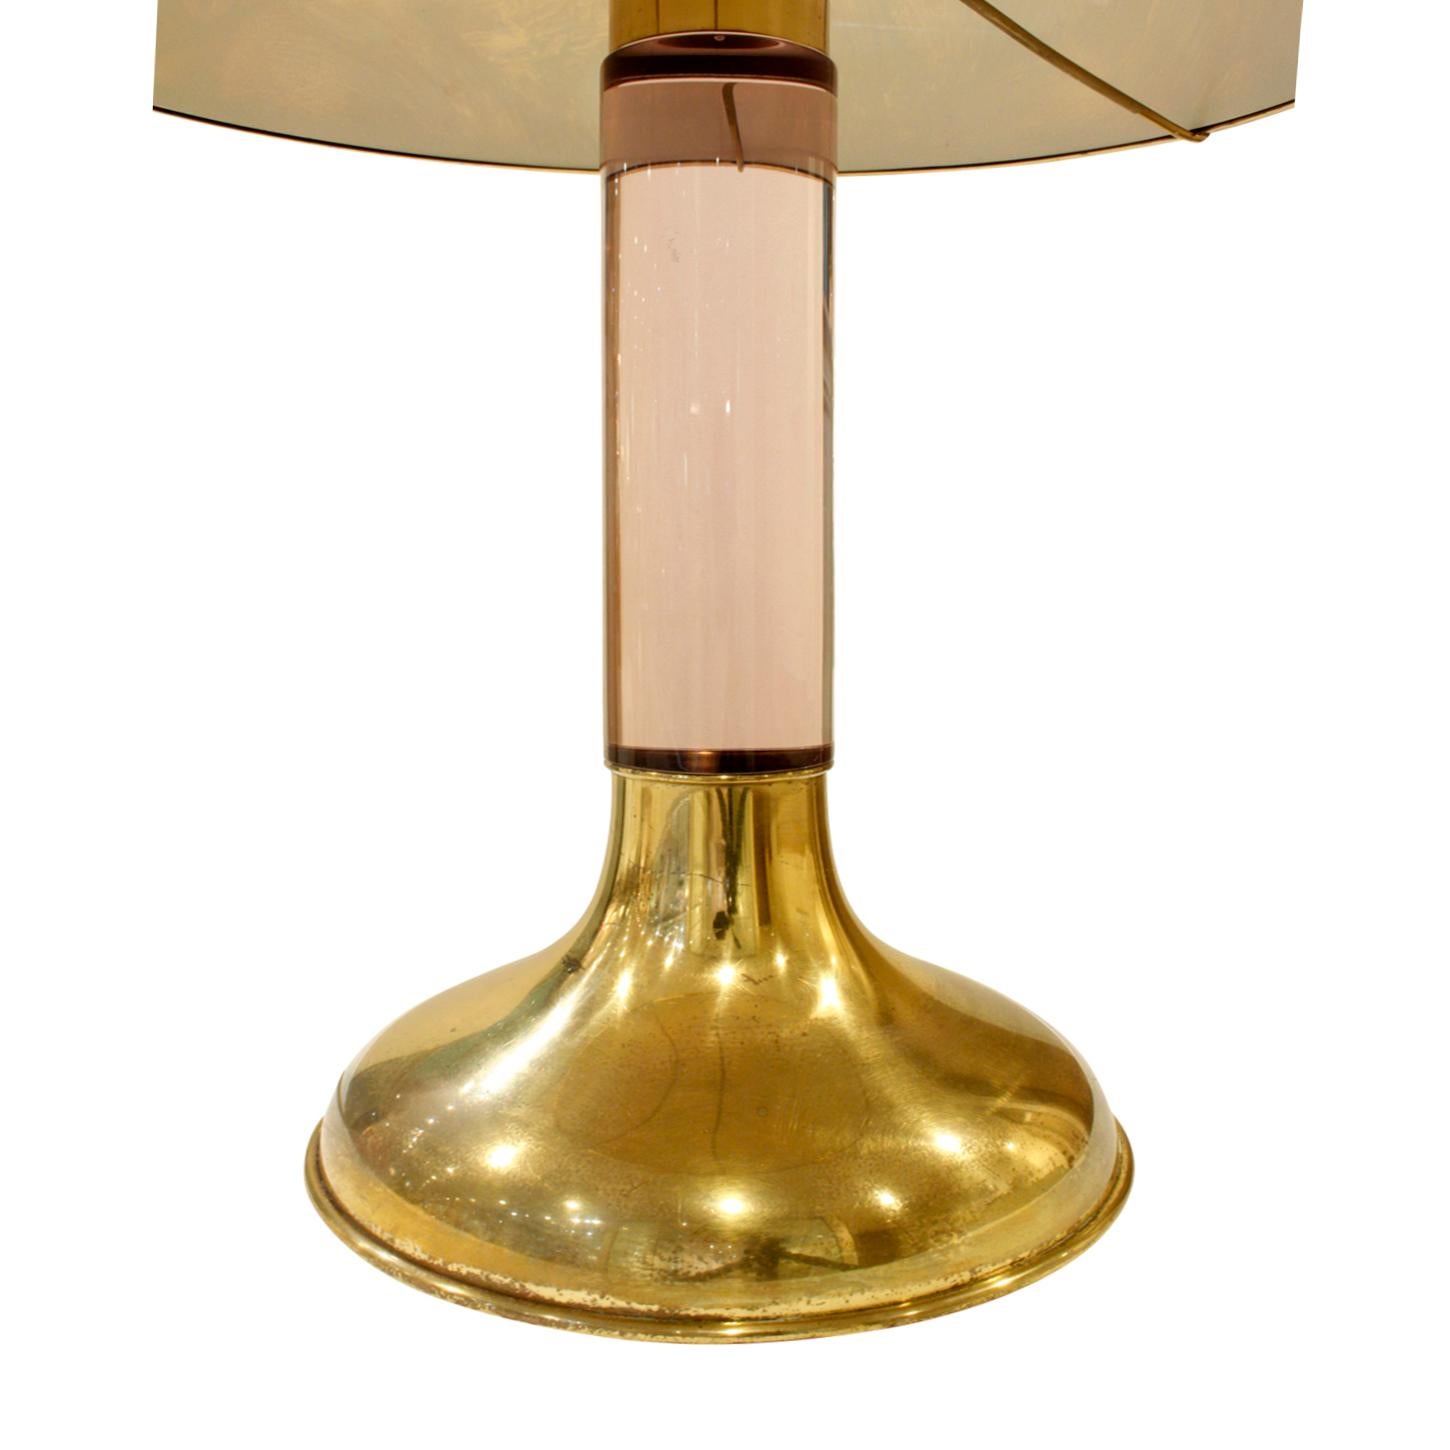 American Chic Table Lamp with Tortoiseshell Lucite Shade, 1970s